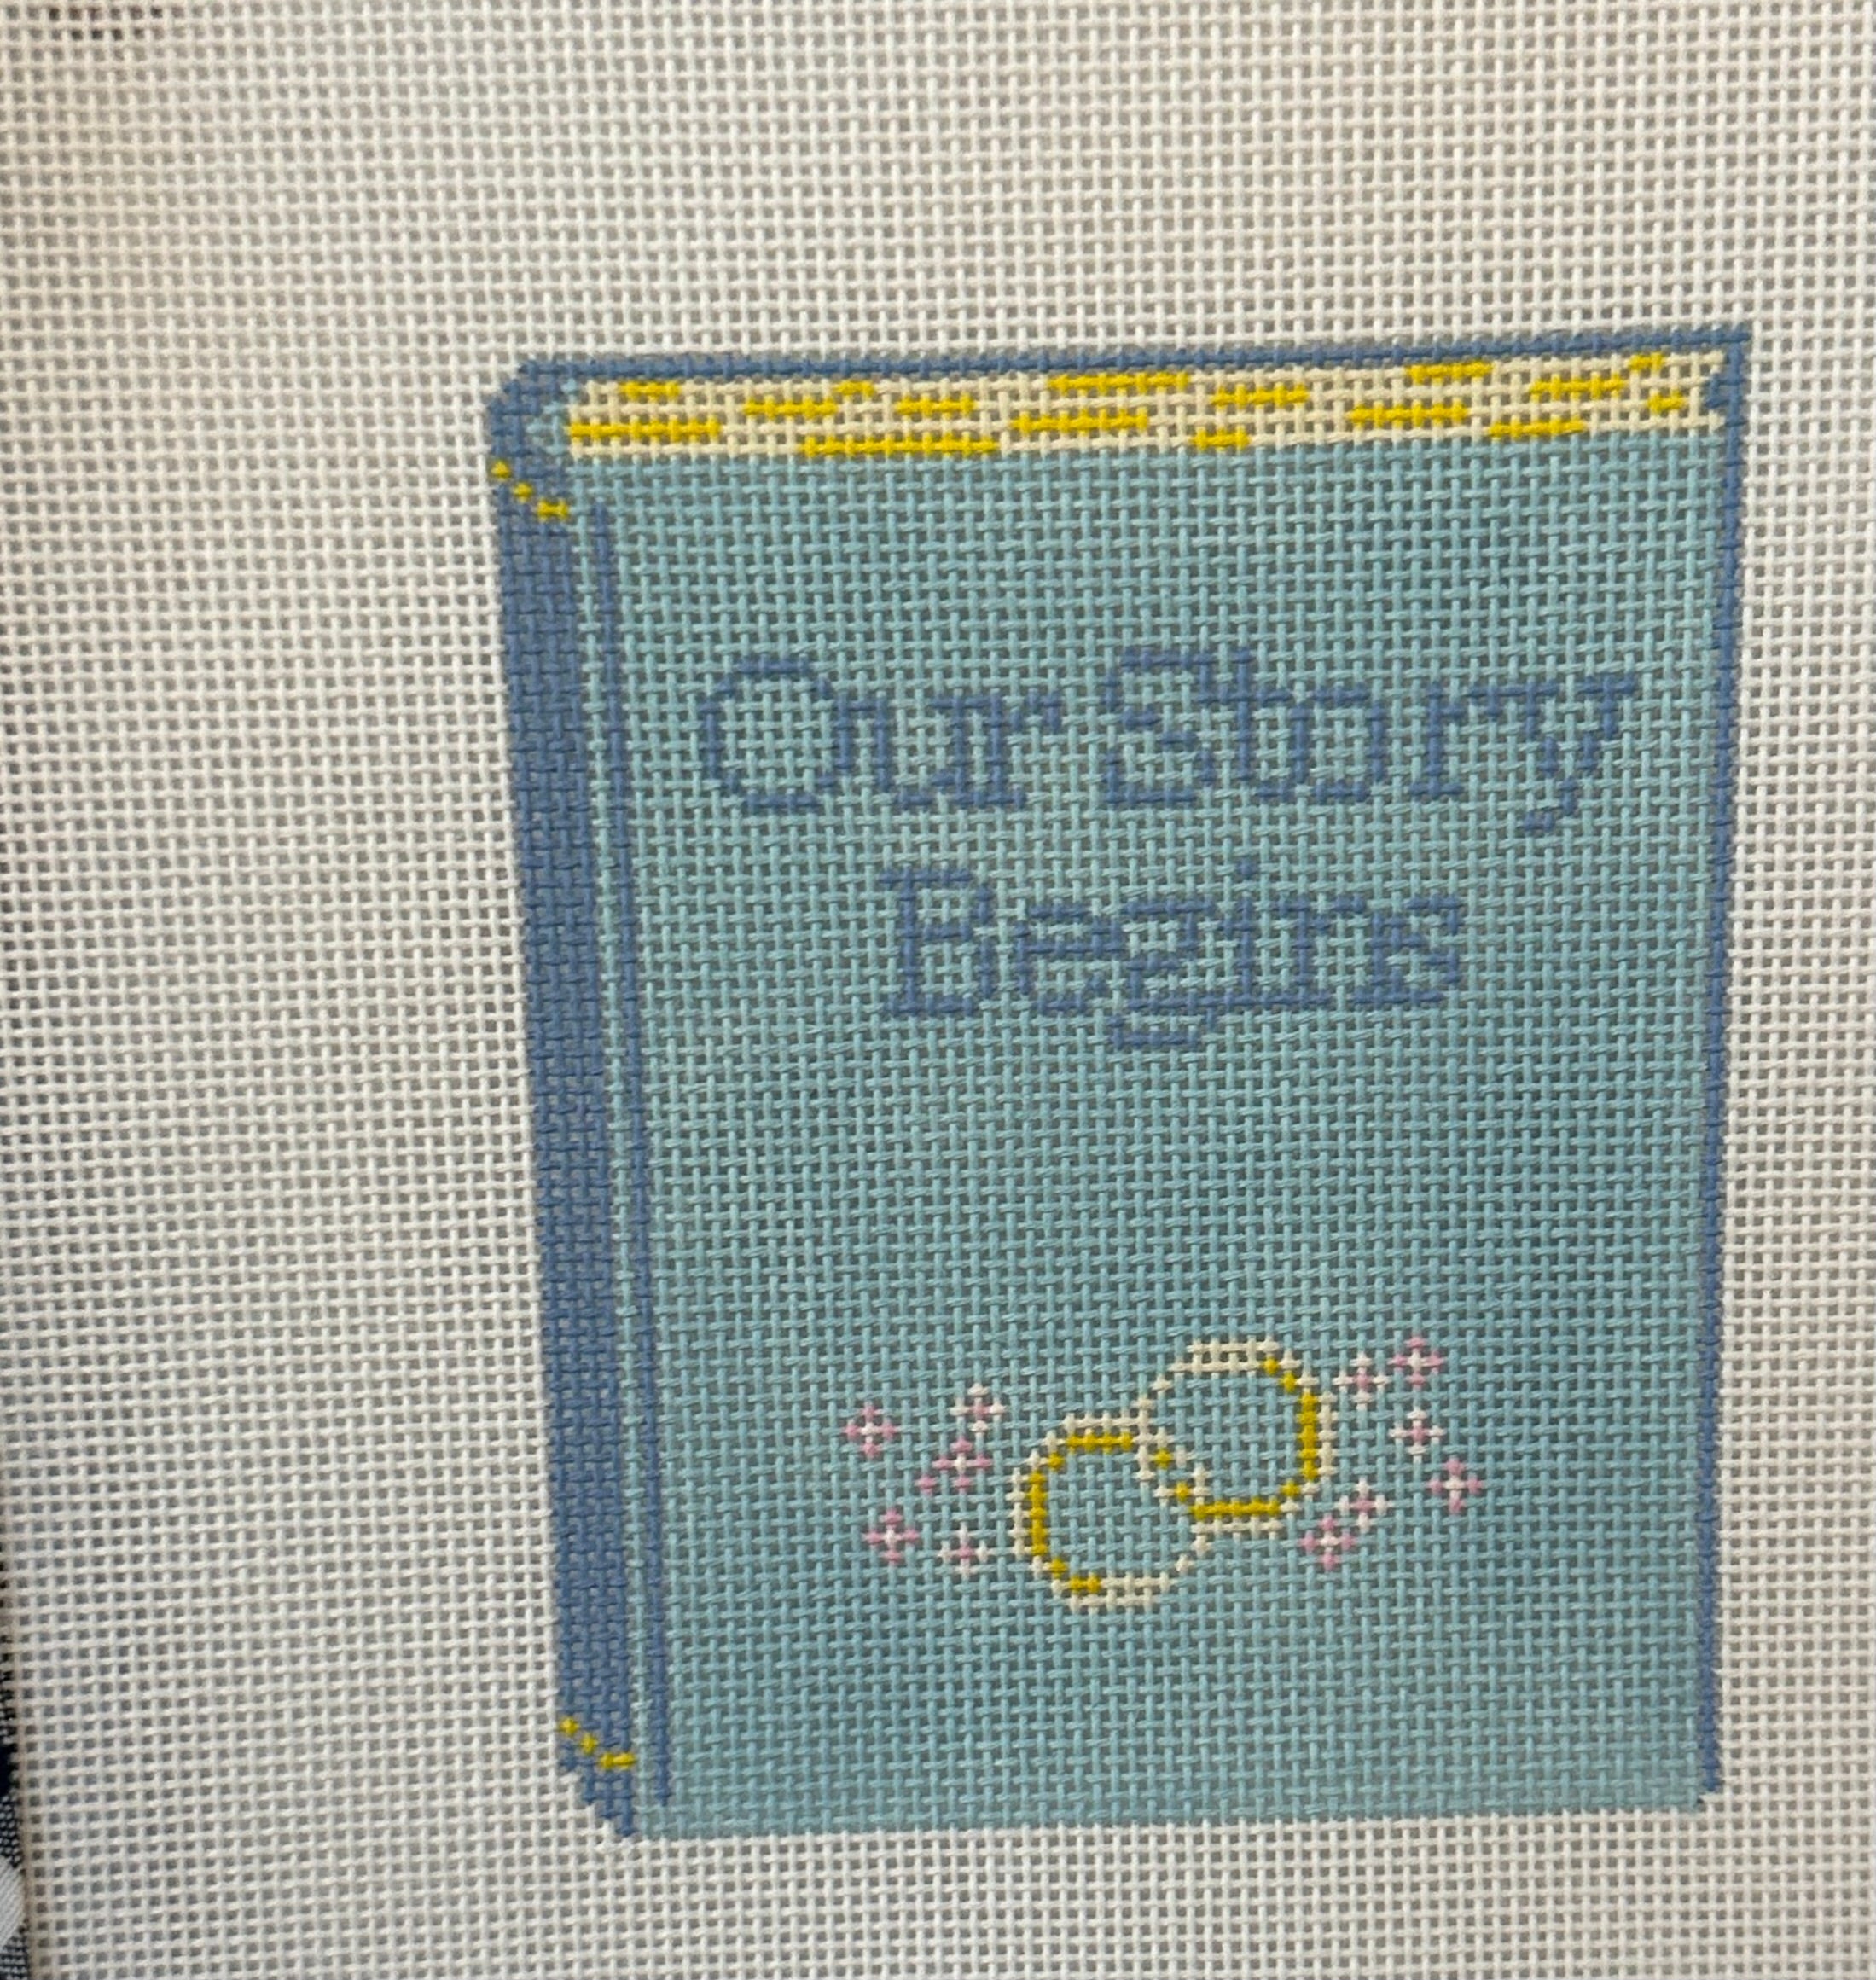 Gingham Stitchery Book Our Story Begins